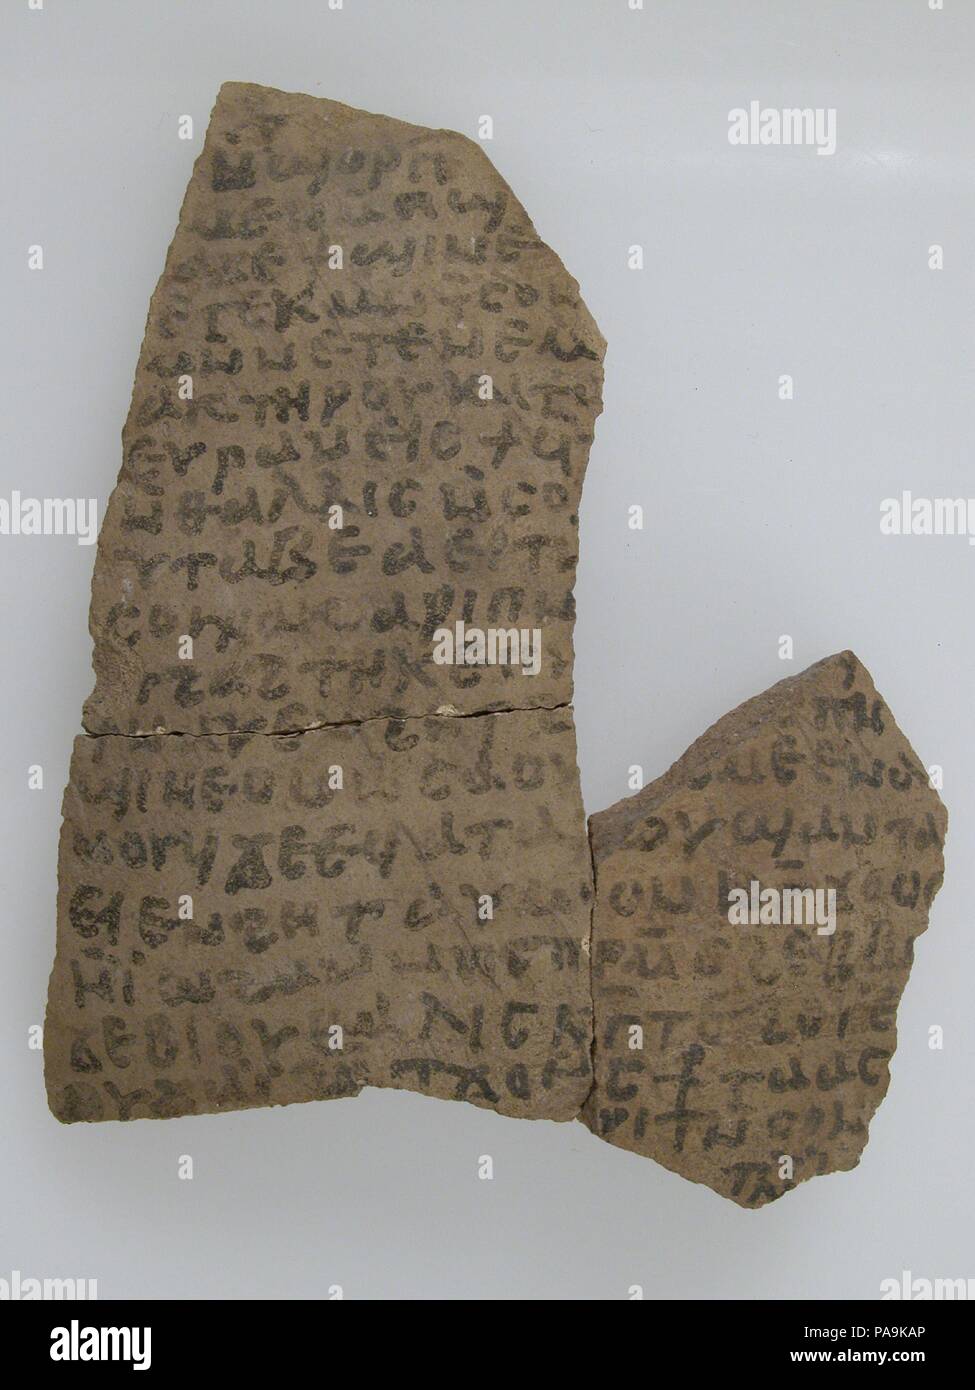 Ostrakon with a Letter from Joseph. Culture: Coptic. Dimensions: 4 7/16 x 5 3/8 in. (11.3 x 13.7 cm). Date: 580-640. Museum: Metropolitan Museum of Art, New York, USA. Stock Photo